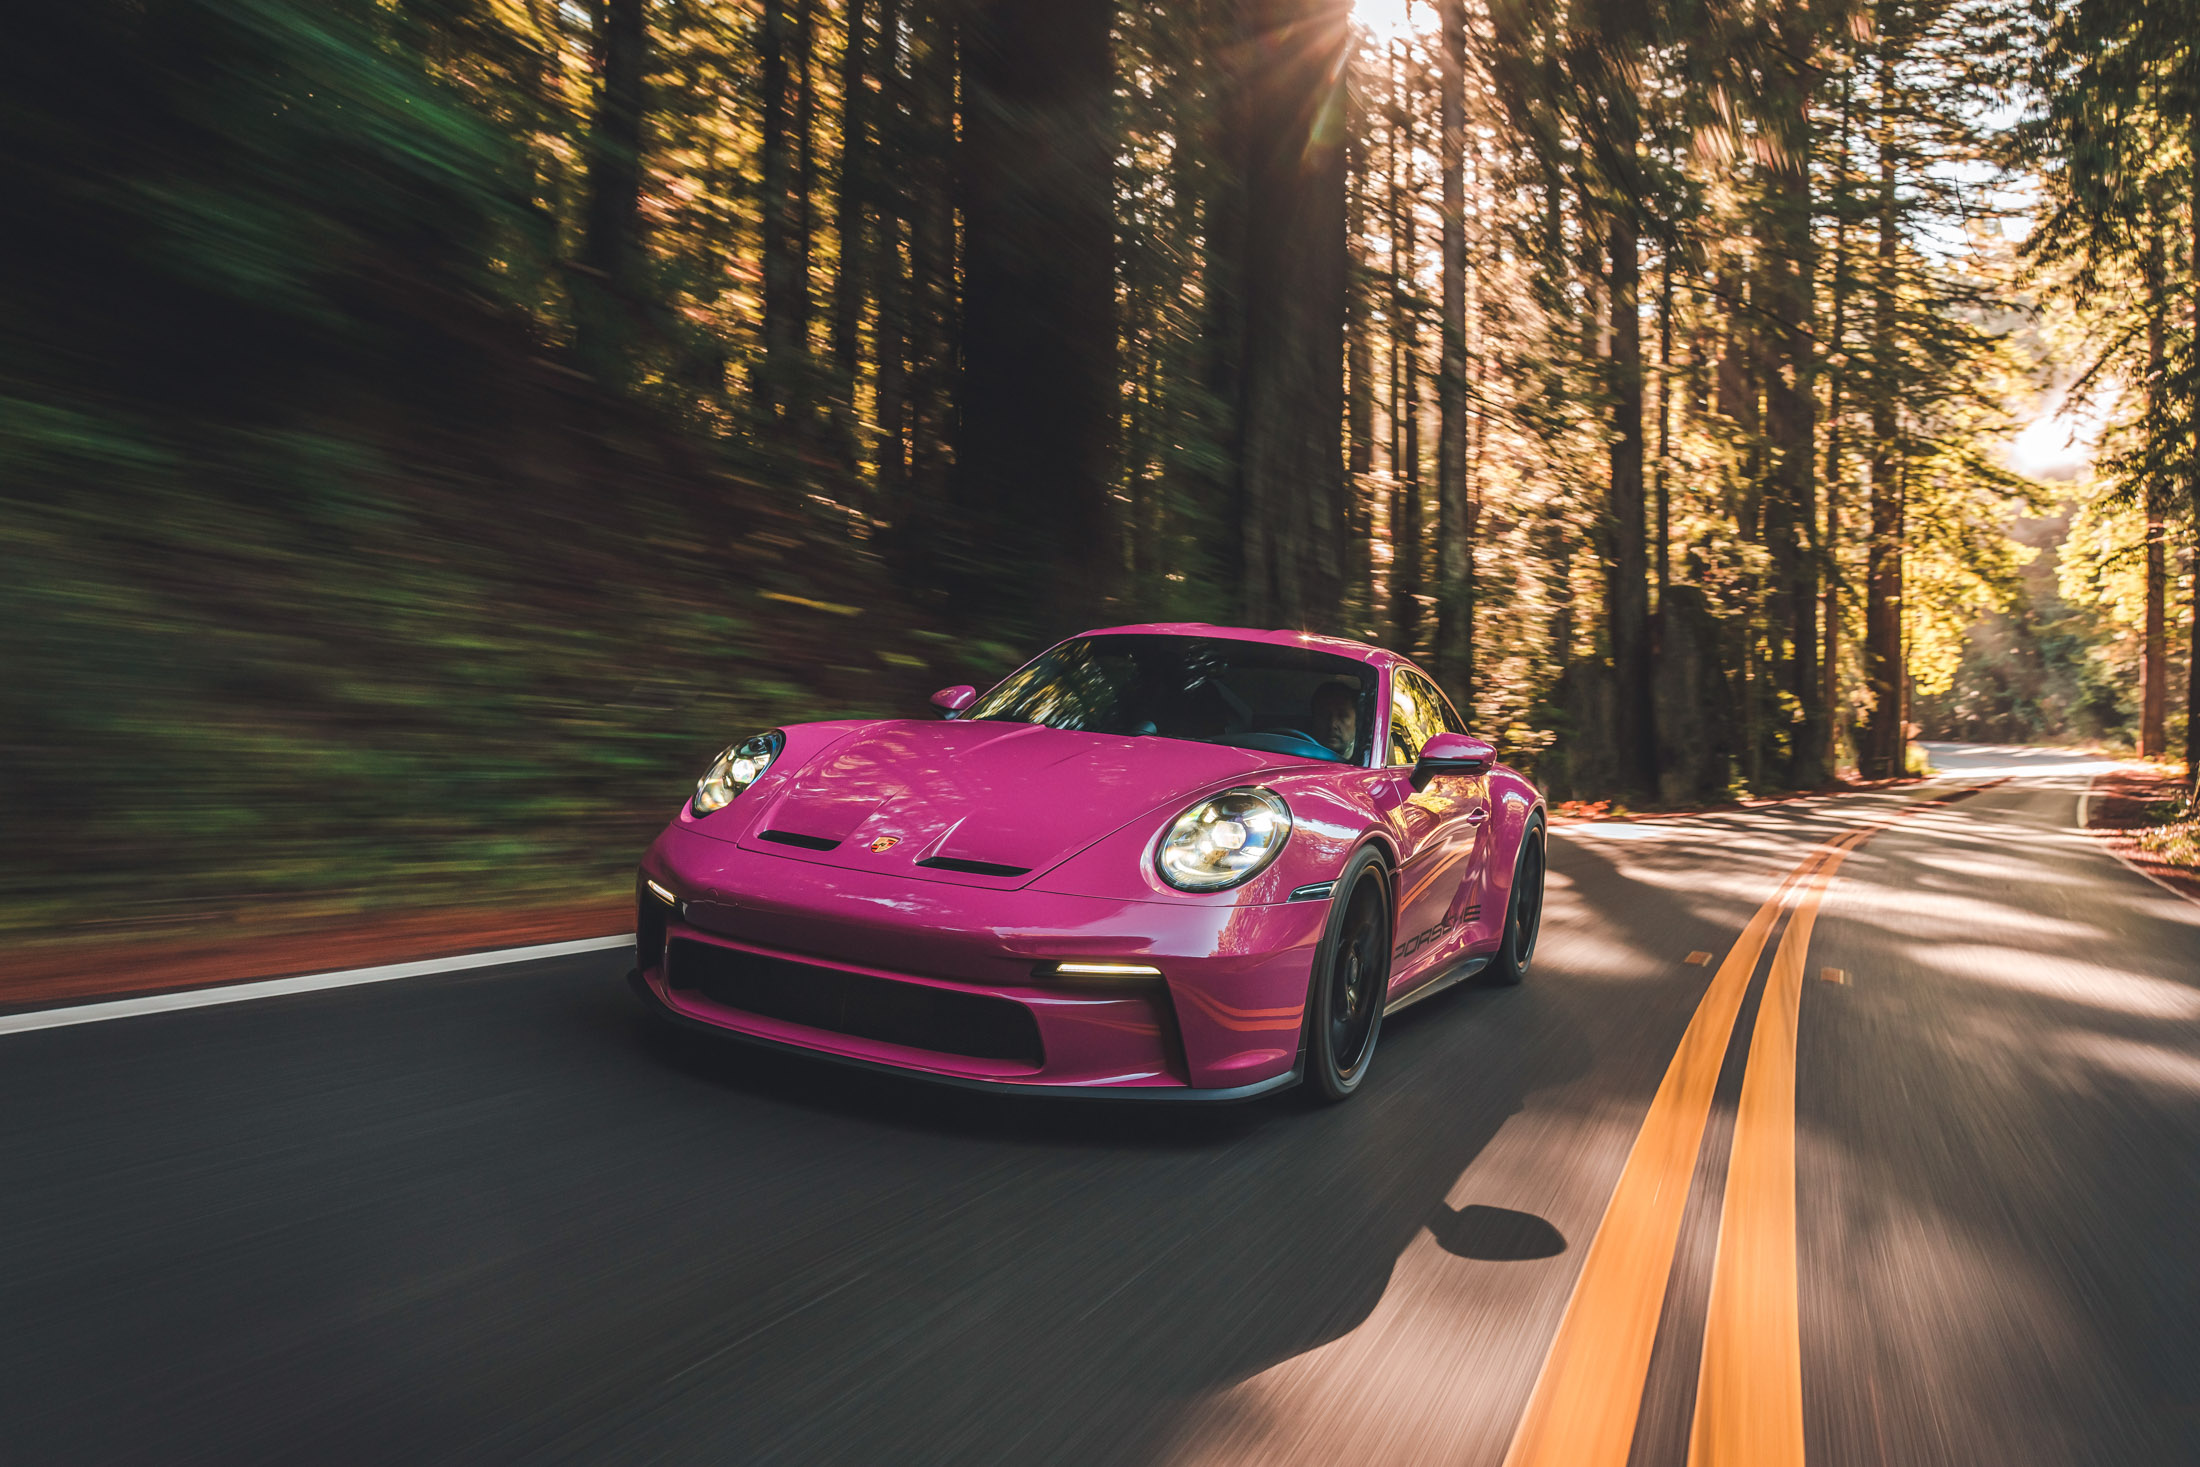 The history of the Porsche 911: 60 years of the iconic sportscar